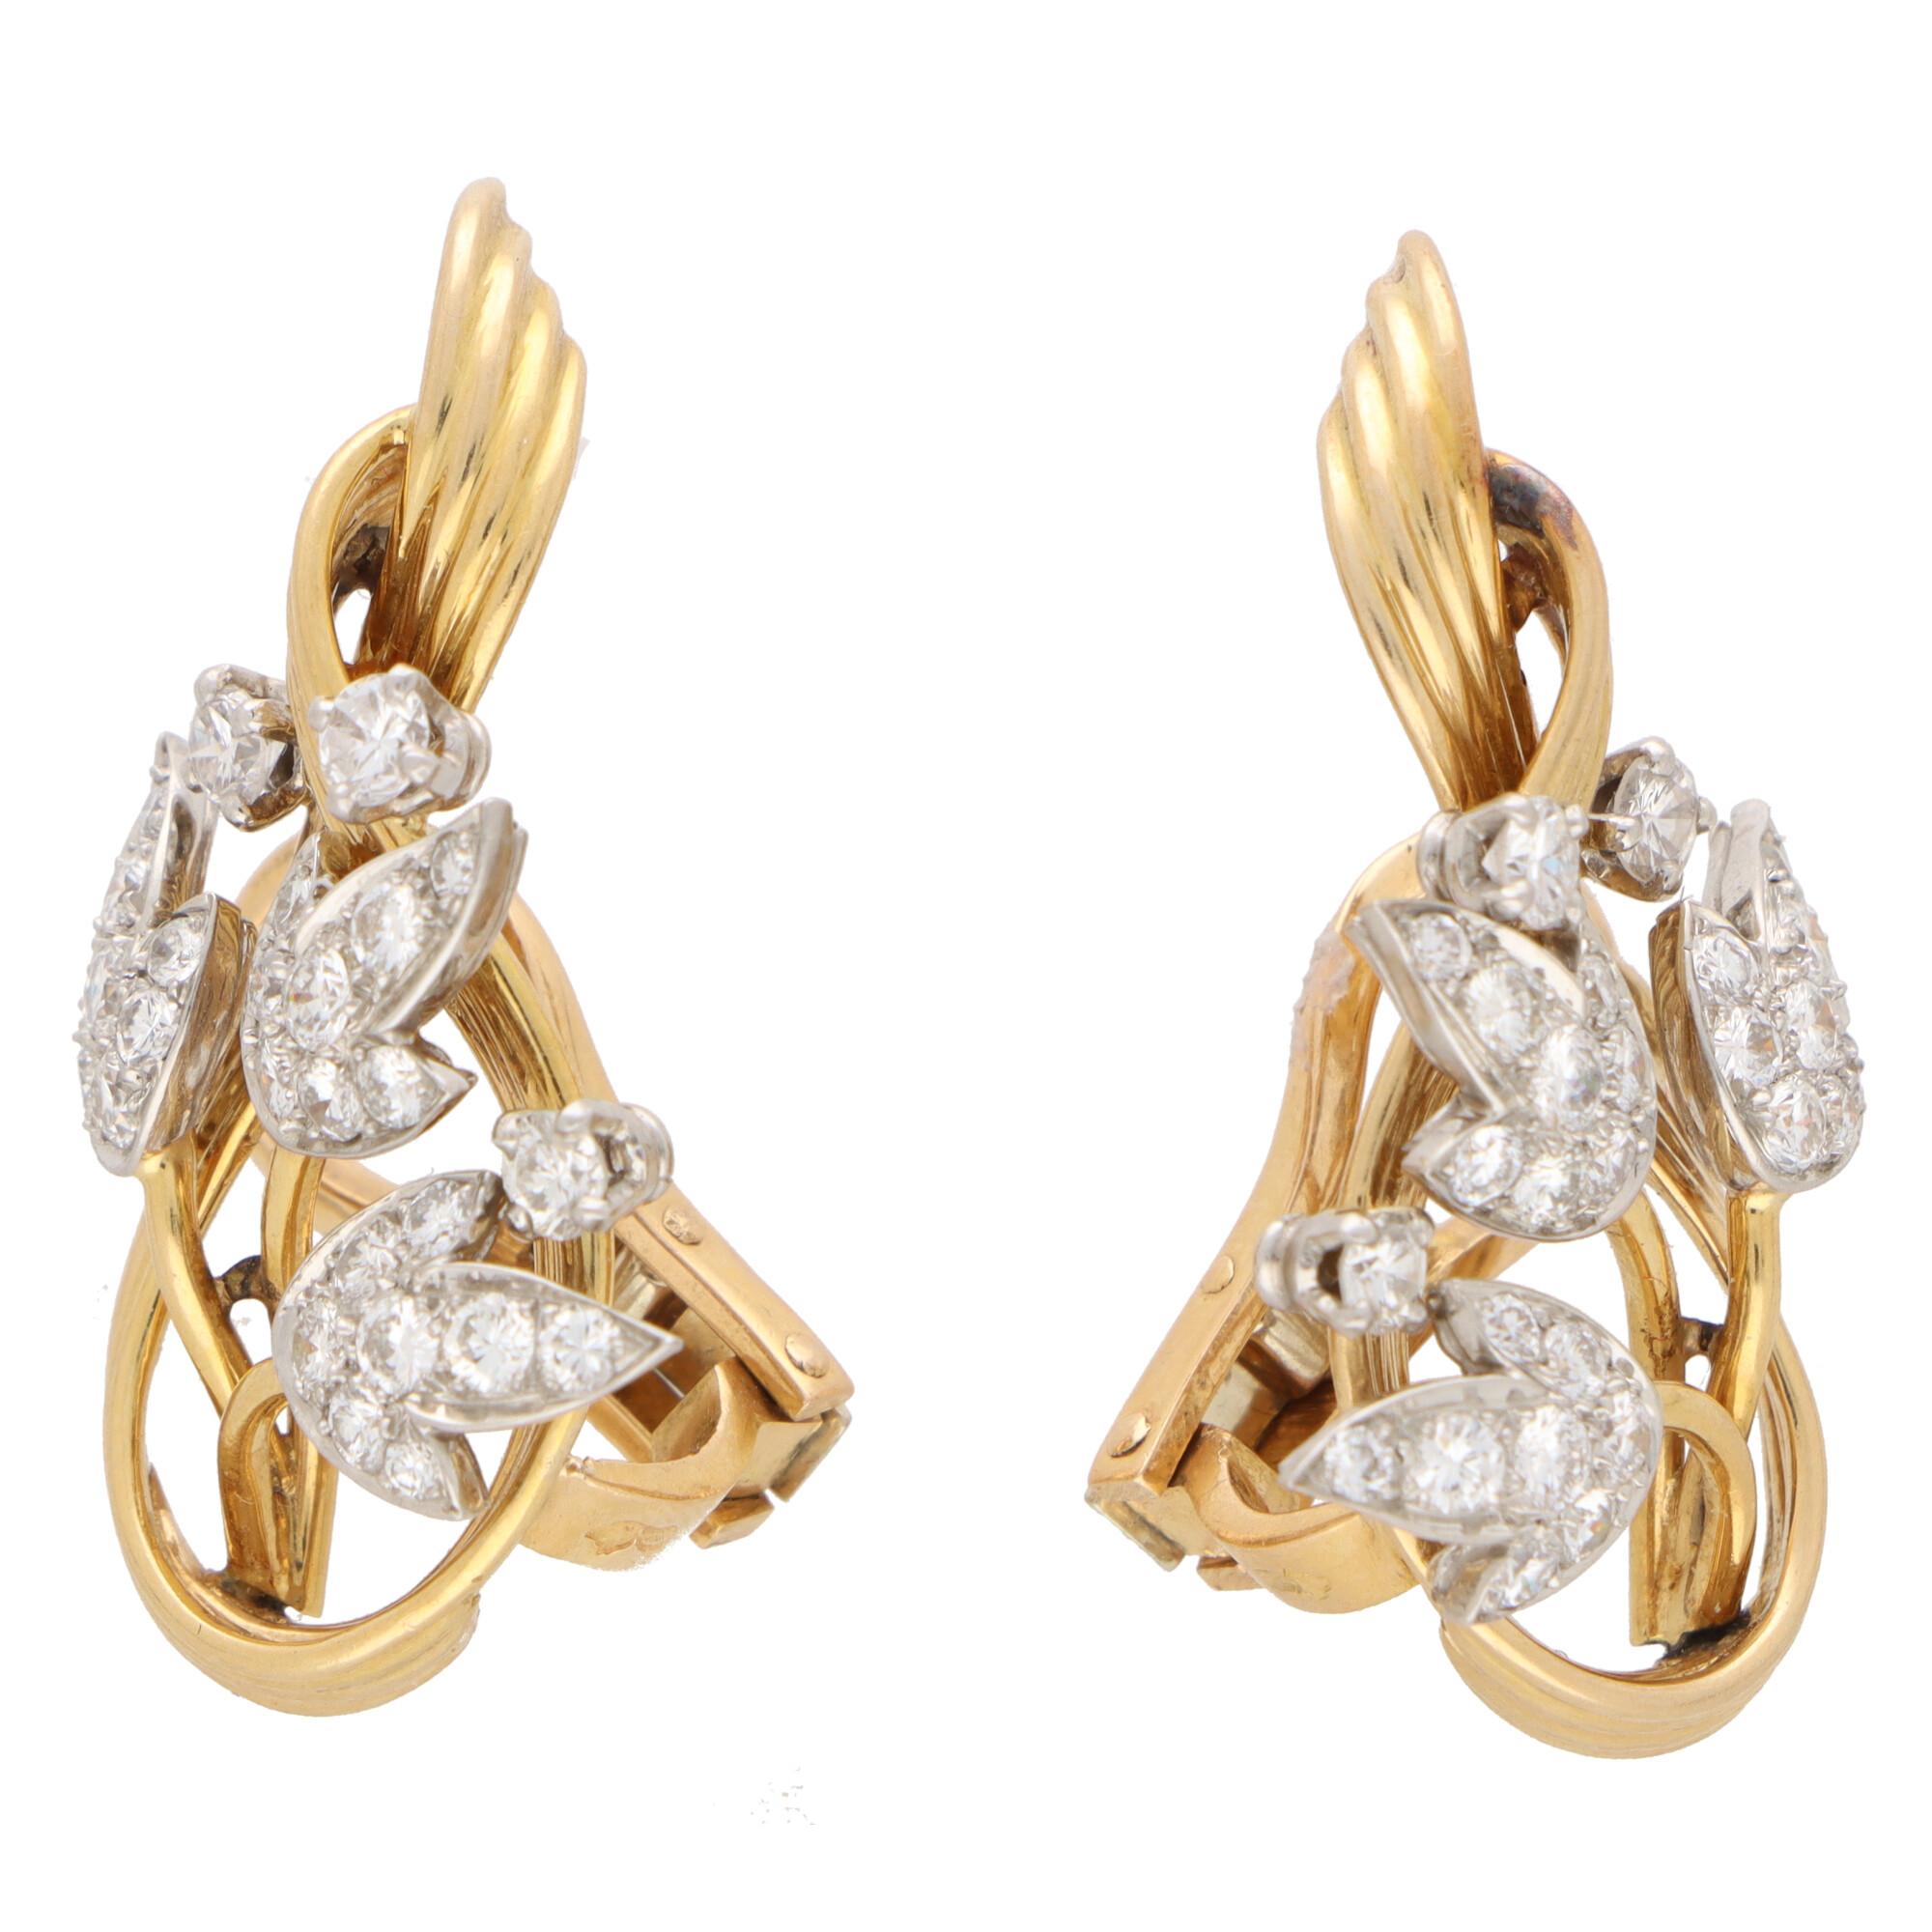 A beautiful pair of floral spray diamond clip on earrings set in 18k yellow gold and platinum.

Each earring is composed of a fluted ribbon surmount in yellow gold, accented with a spray of three flowers blooming inside. Each flower is composed of a